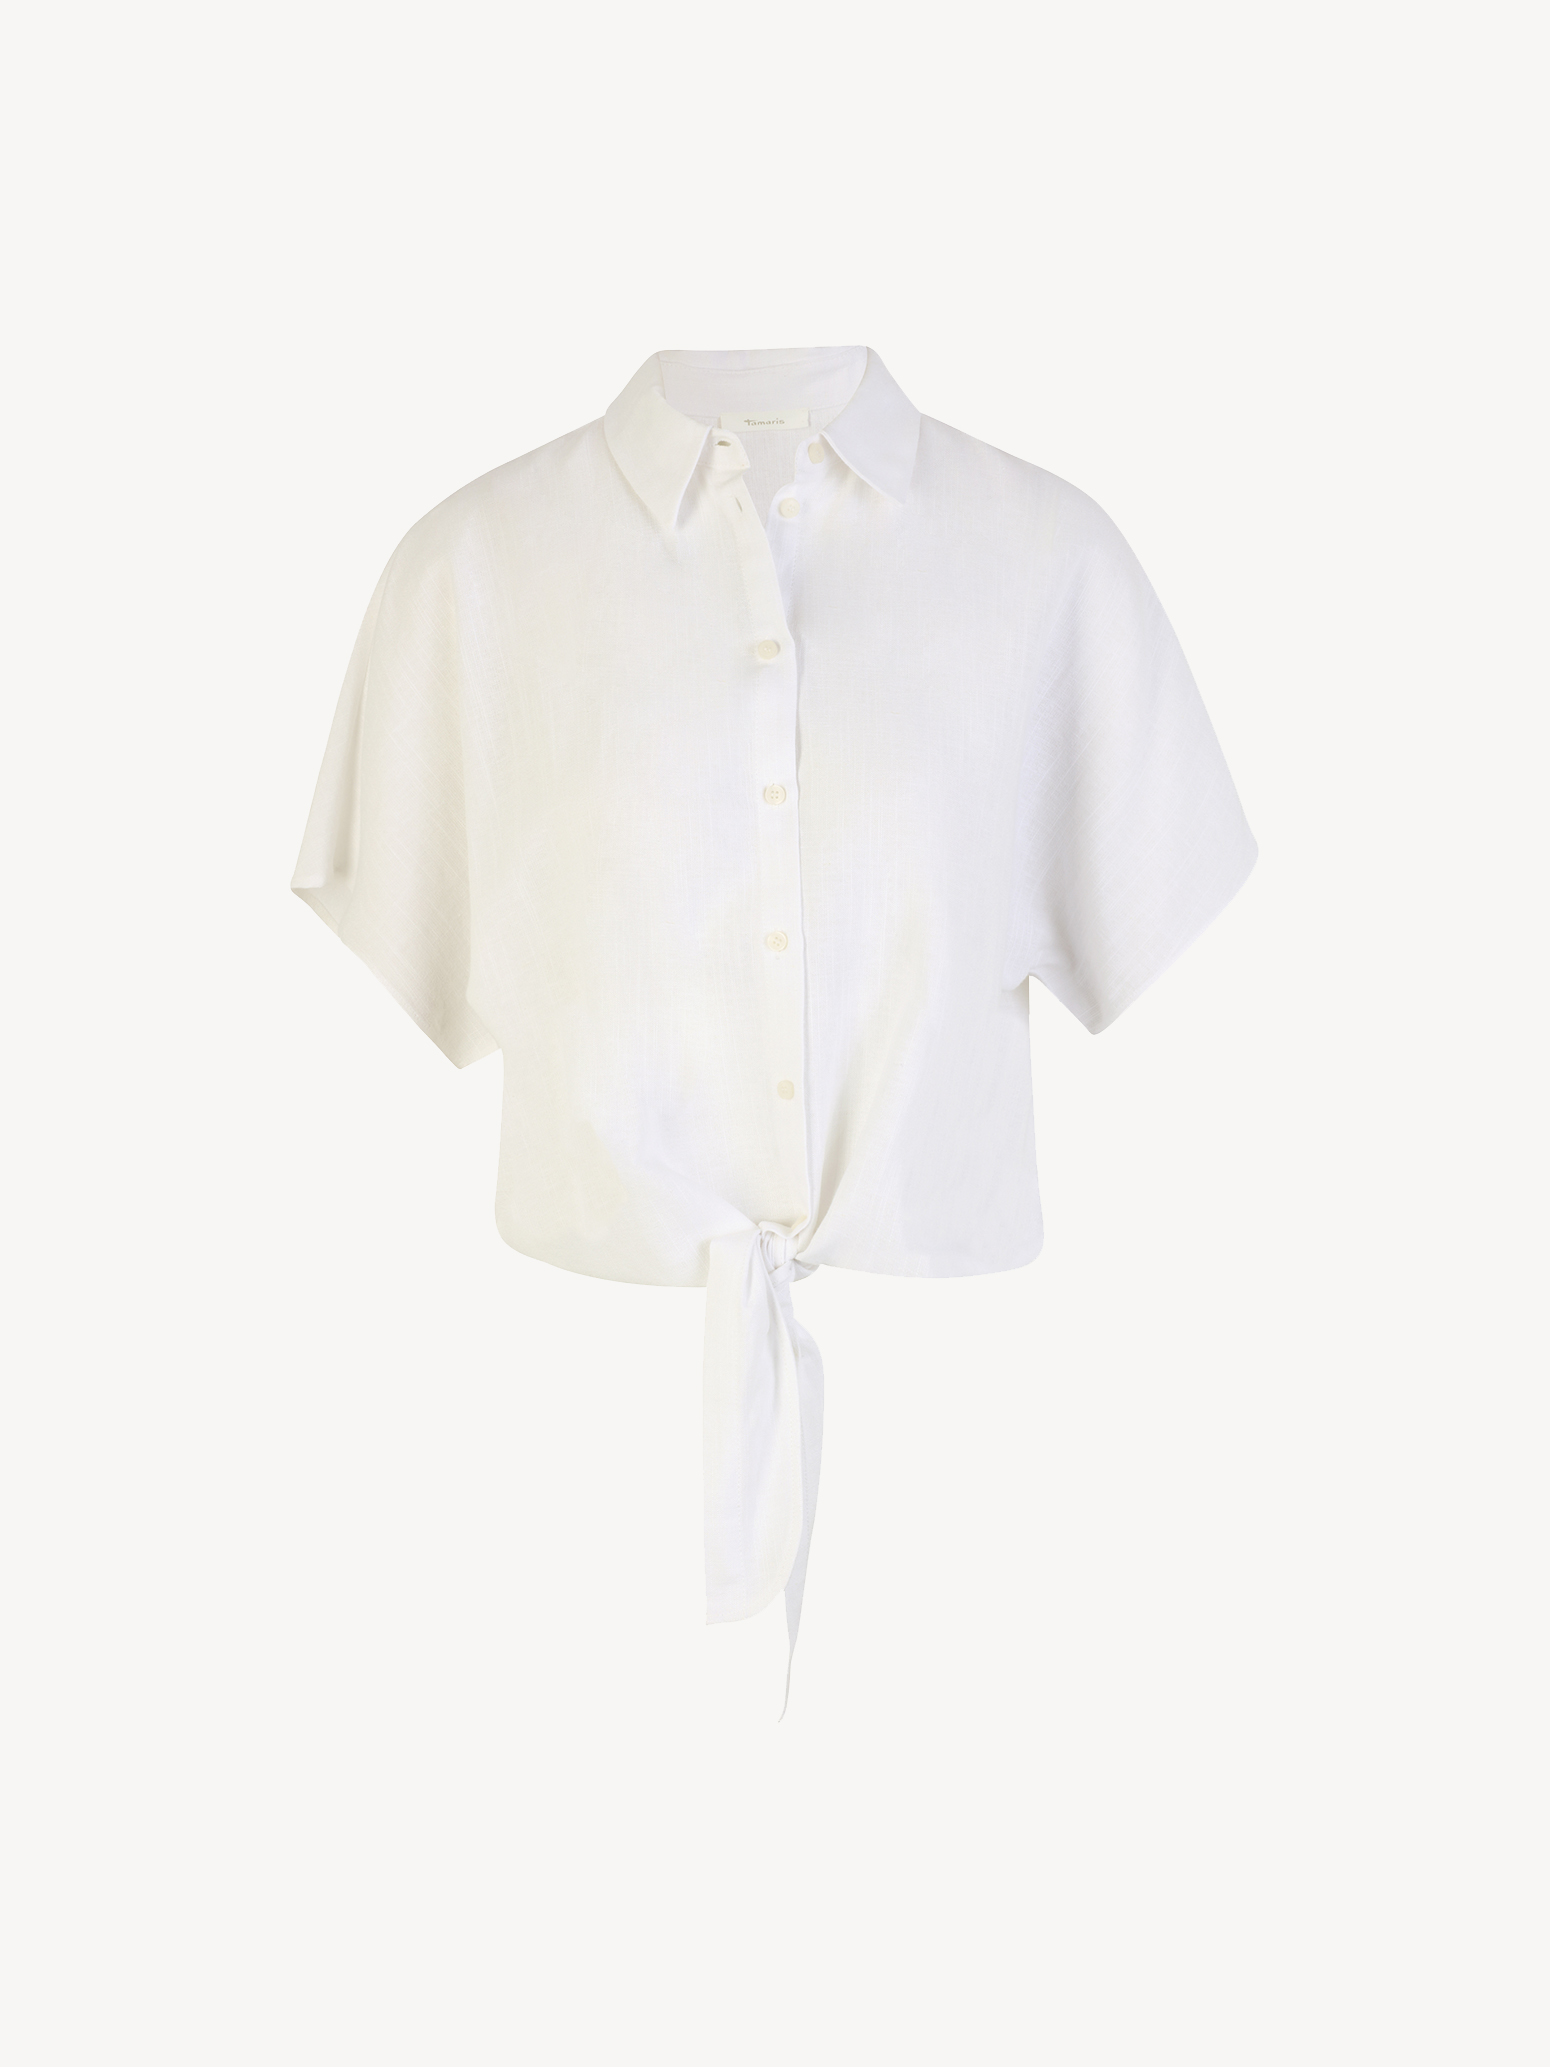 Tamaris Shirts & Blouses: Discover bargains and offers in the Tamaris shop  now!